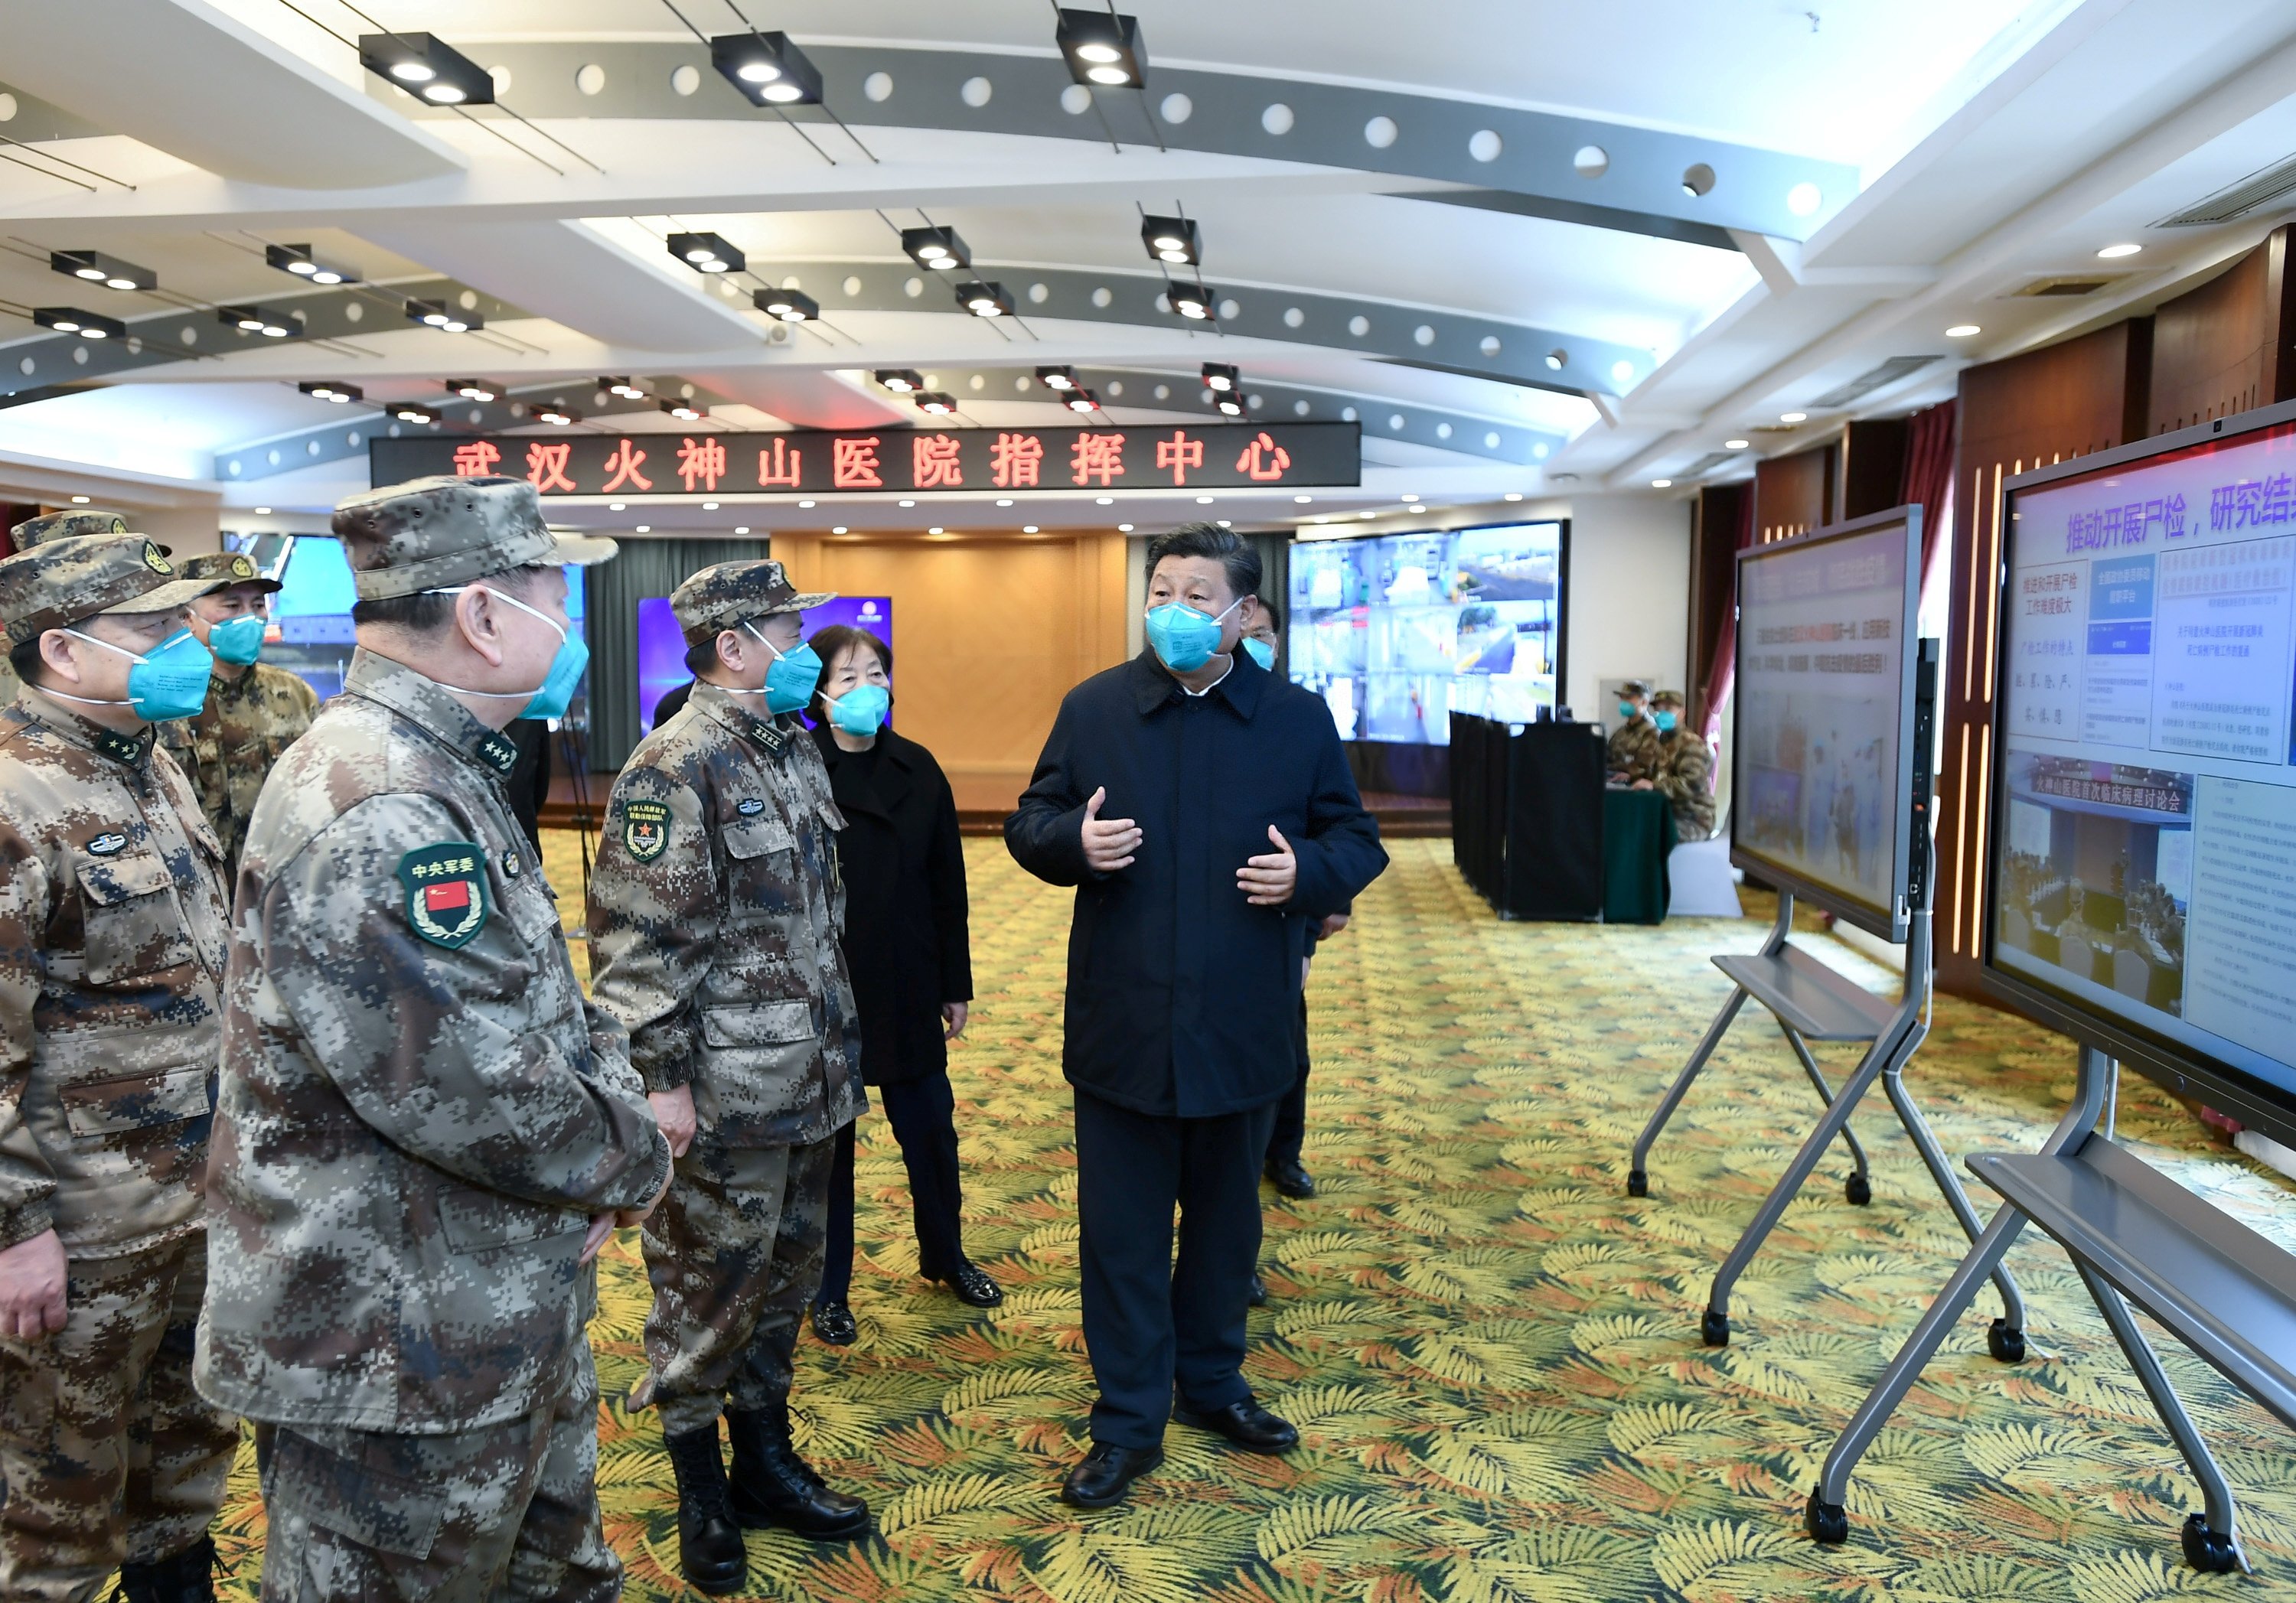 Chinese President Xi Jinping learns about the hospital's operations, treatment of patients, protection for medical workers and scientific research at the Huoshenshan Hospital in Wuhan, the epicentre of the novel coronavirus outbreak, Hubei province, China March 10, 2020. Xie Huanchi/Xinhua via REUTERS